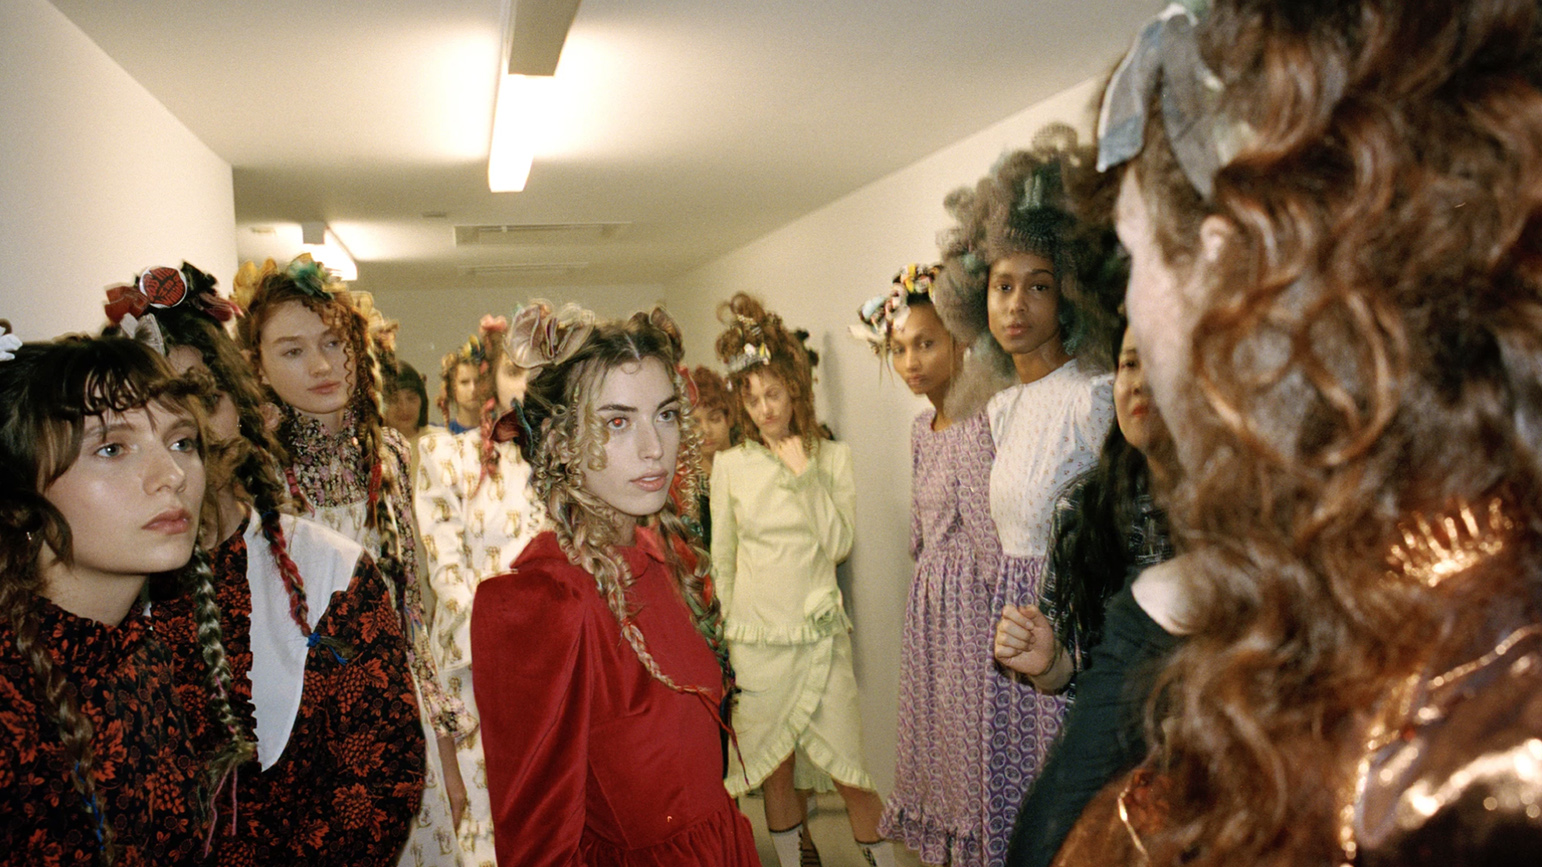 Behind-the-scenes photograph of models at a fashion show